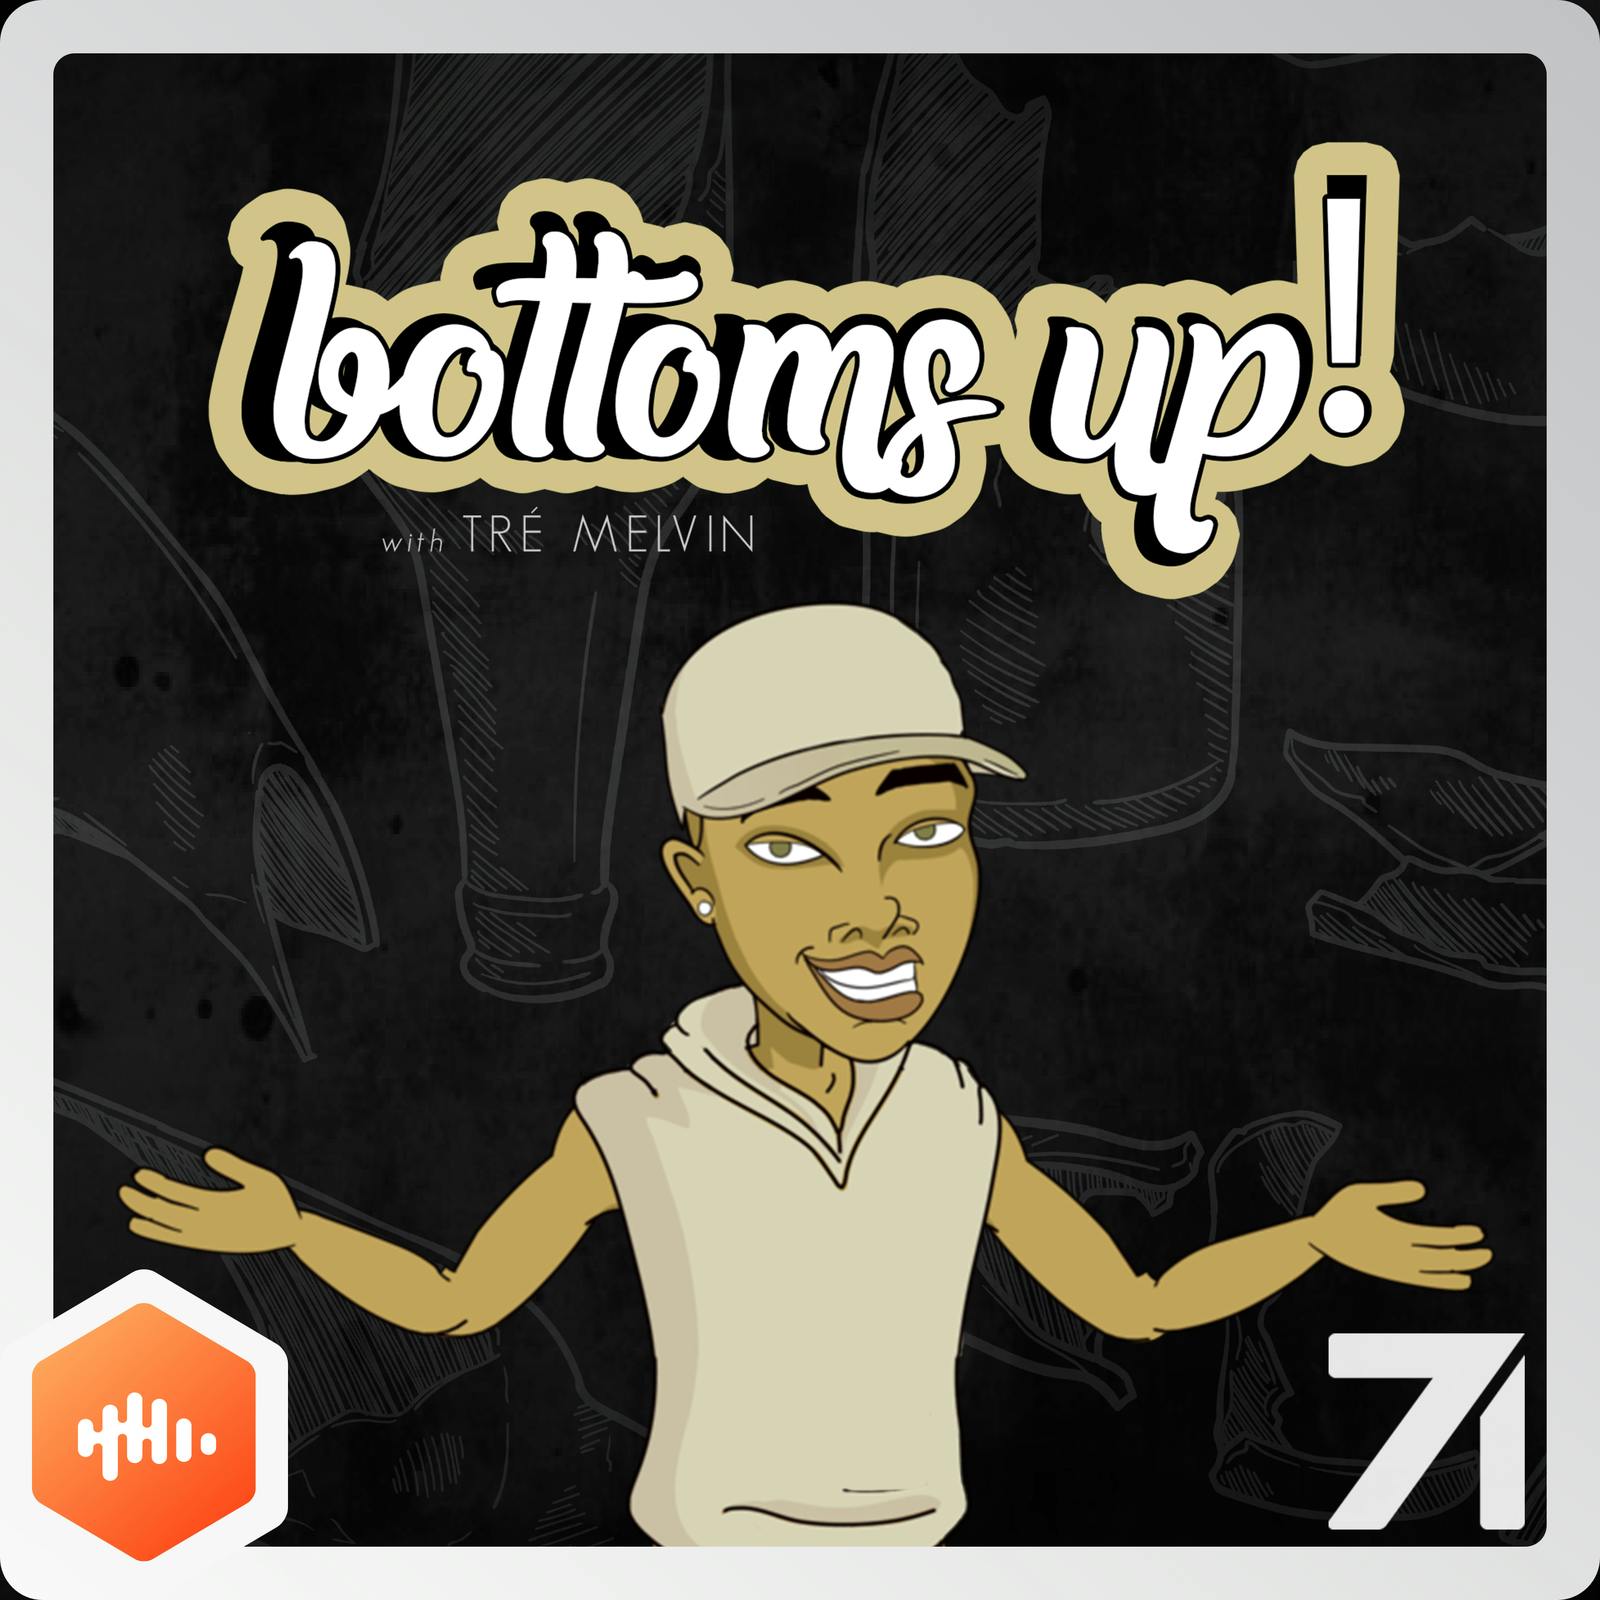 8: Slap on the Beach (feat. My Bestfriend, Kathy) - Bottoms Up! with Tré Melvin